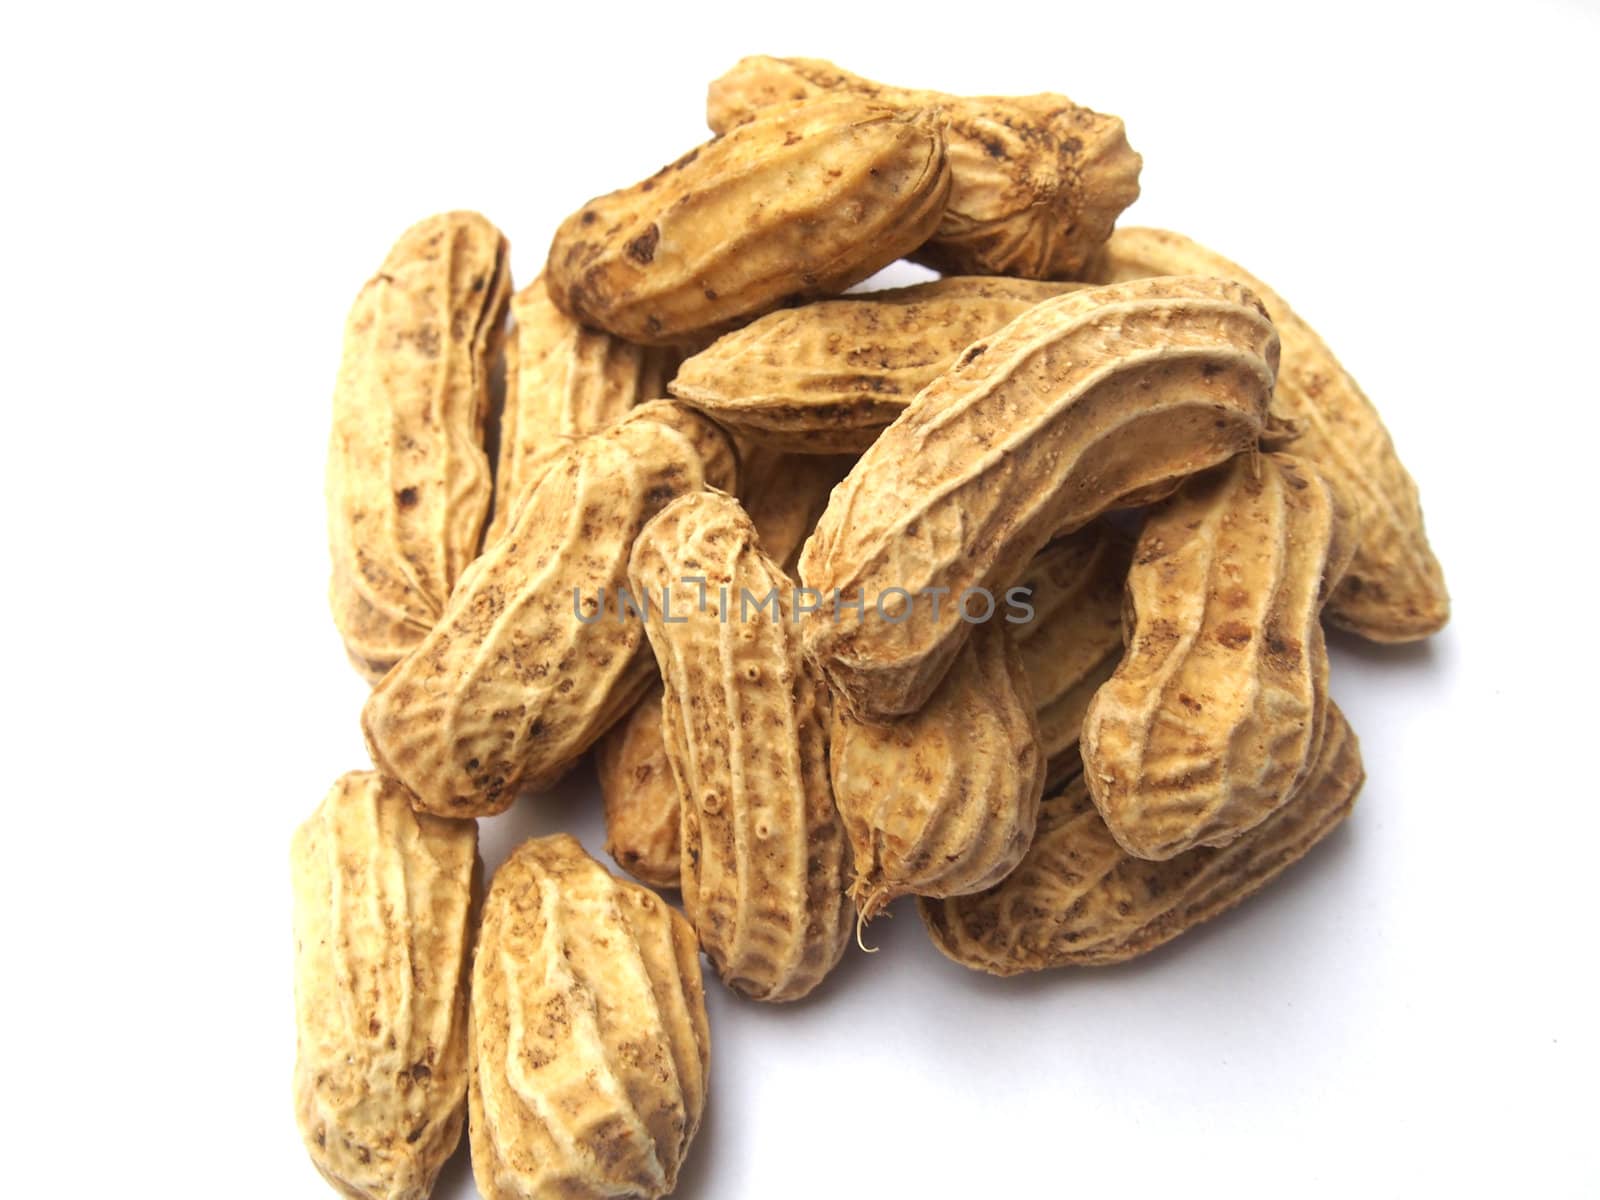 Peanuts on a white background.